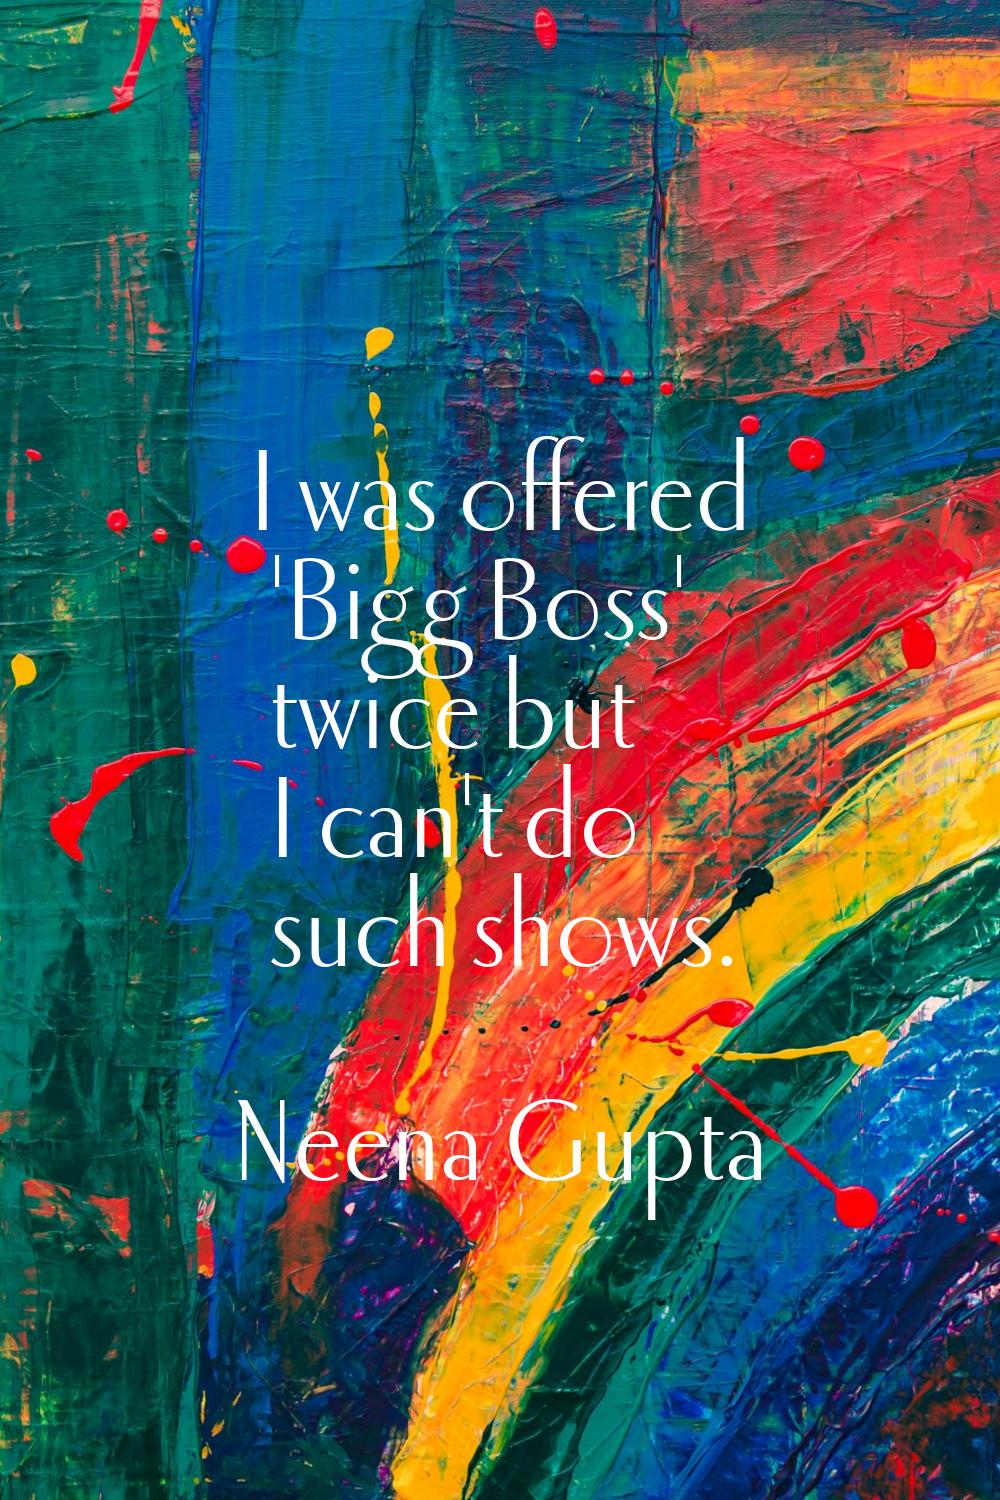 I was offered 'Bigg Boss' twice but I can't do such shows.